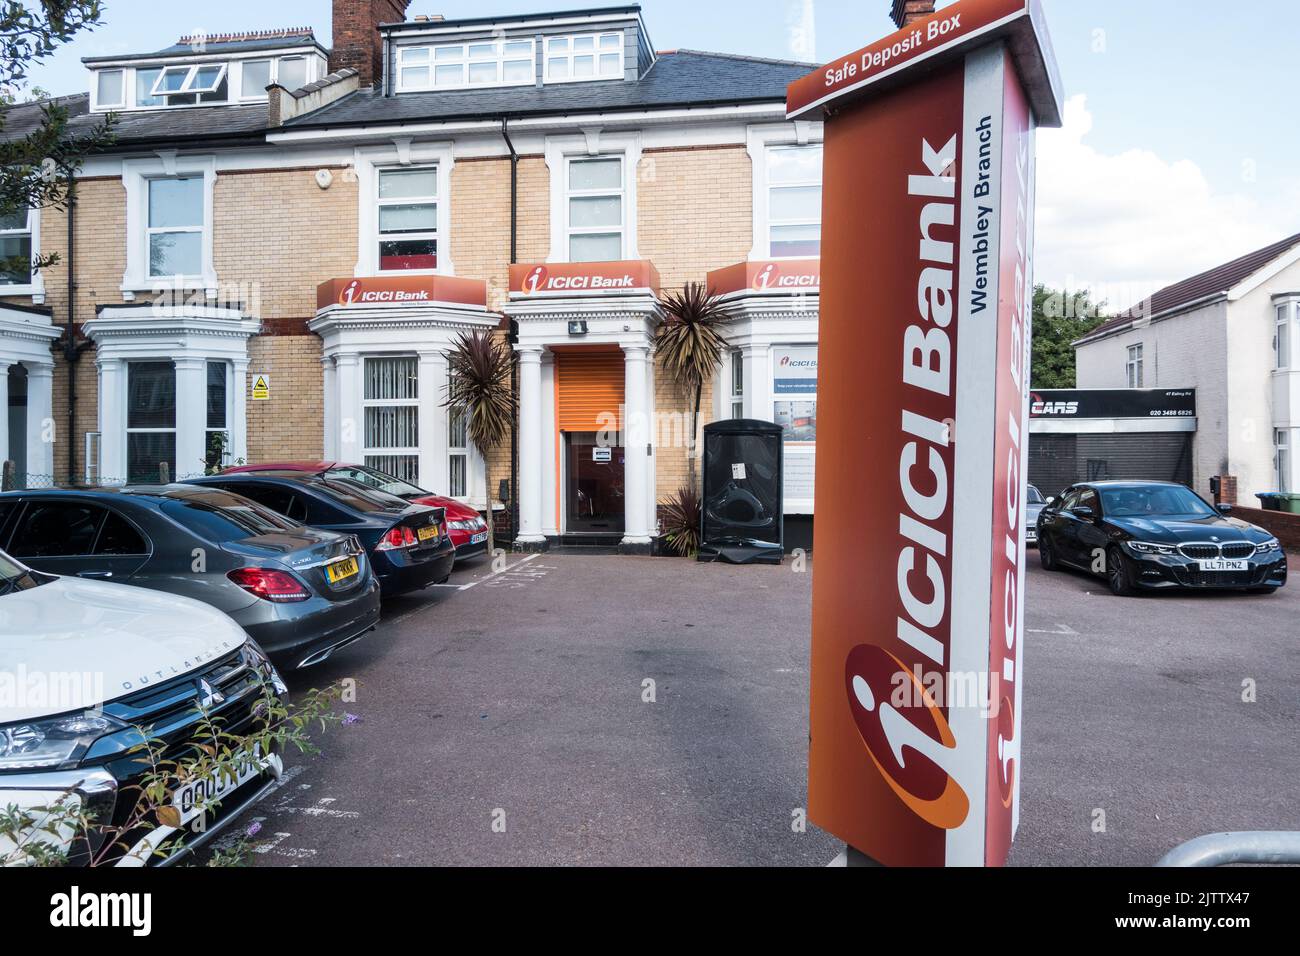 ICICI bank branch in London Ealing Road, Wembley Stock Photo